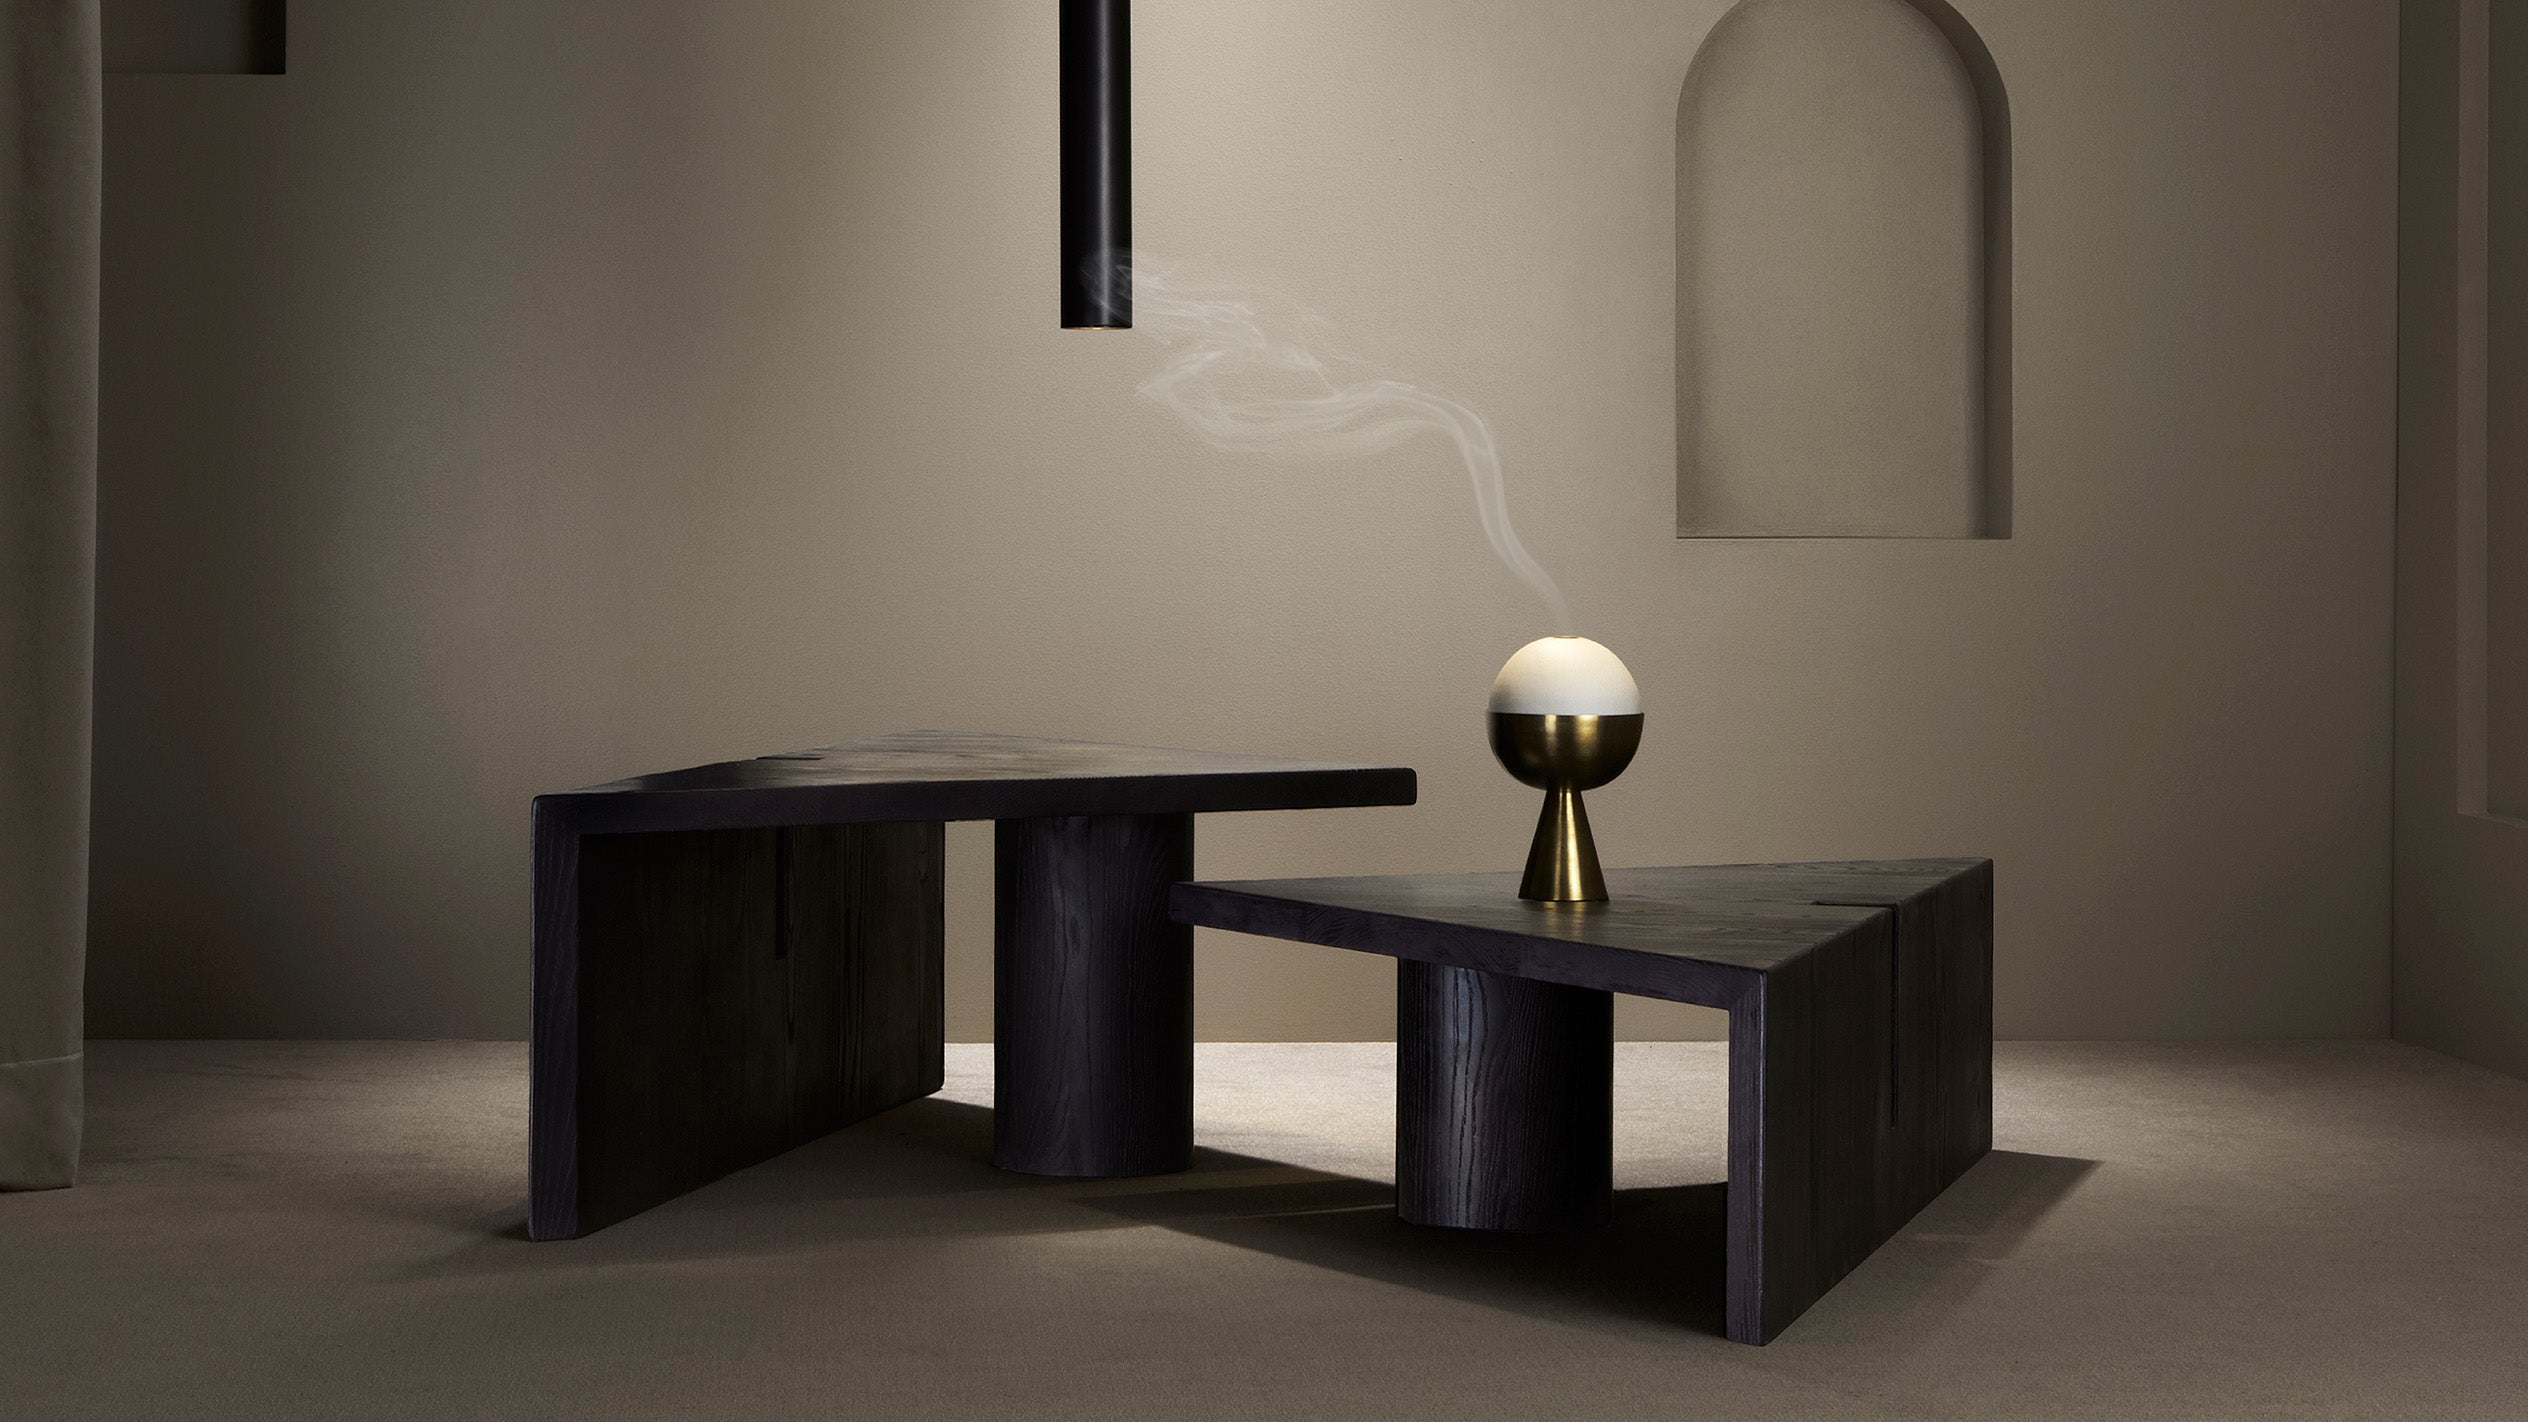 A decorative object used for burning incense sits on top of a modular PORTAL coffee table in Blackened Ash Wood. 